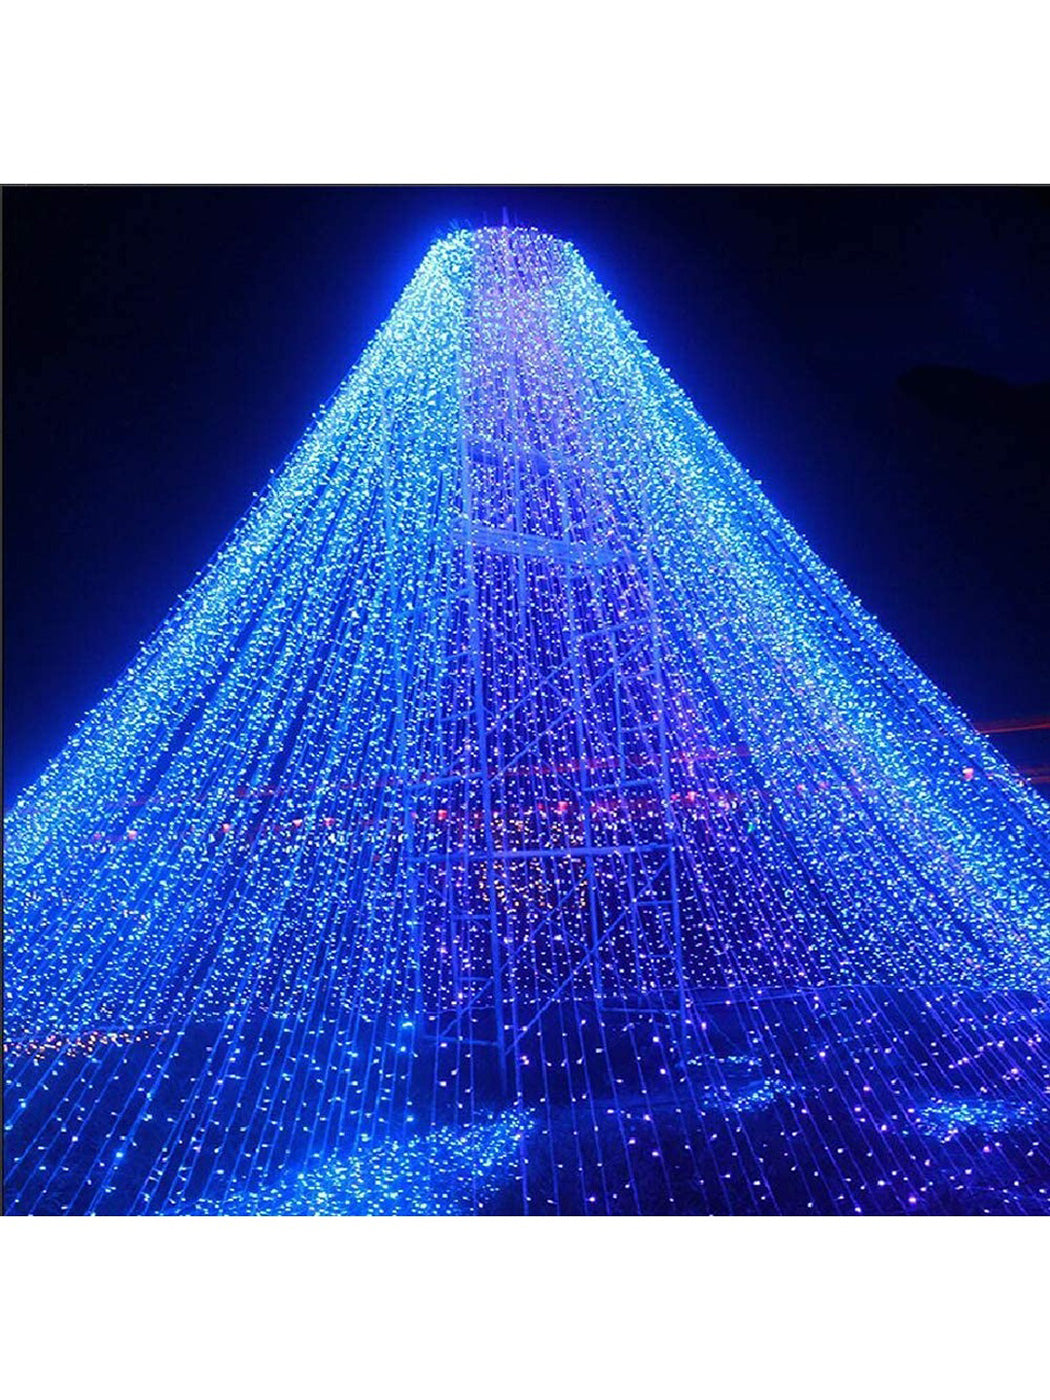 DecorTwist LED String Light for Home and Office Decor | Indoor & Outdoor Decorative Lights | Christmas | Diwali | Wedding | 15 Meter Length (Pack of 2) (Blue)